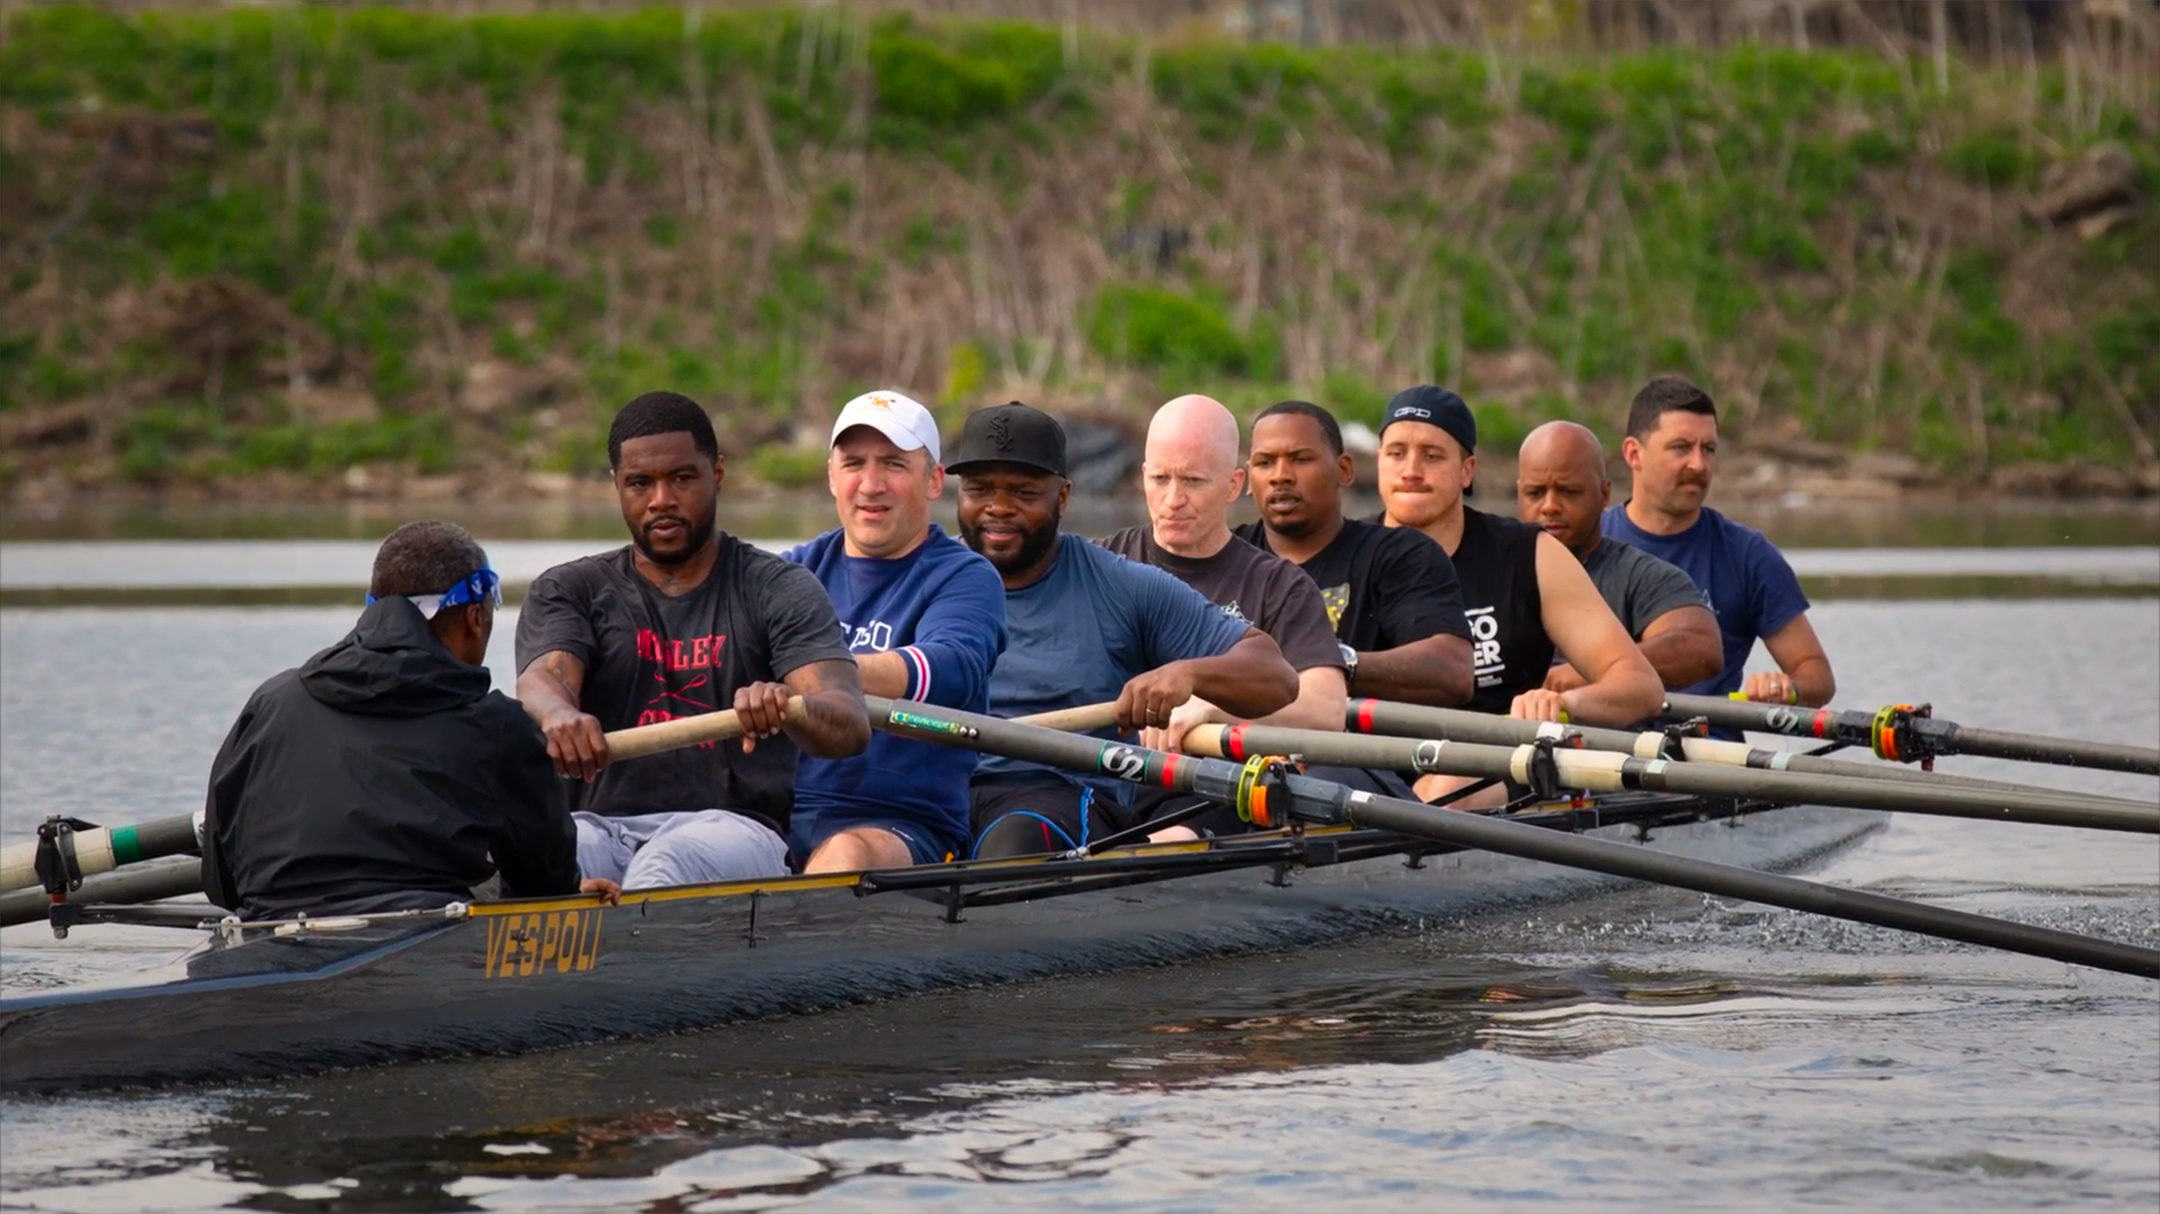 nine people in a boat, five black and four white, rowing on a river